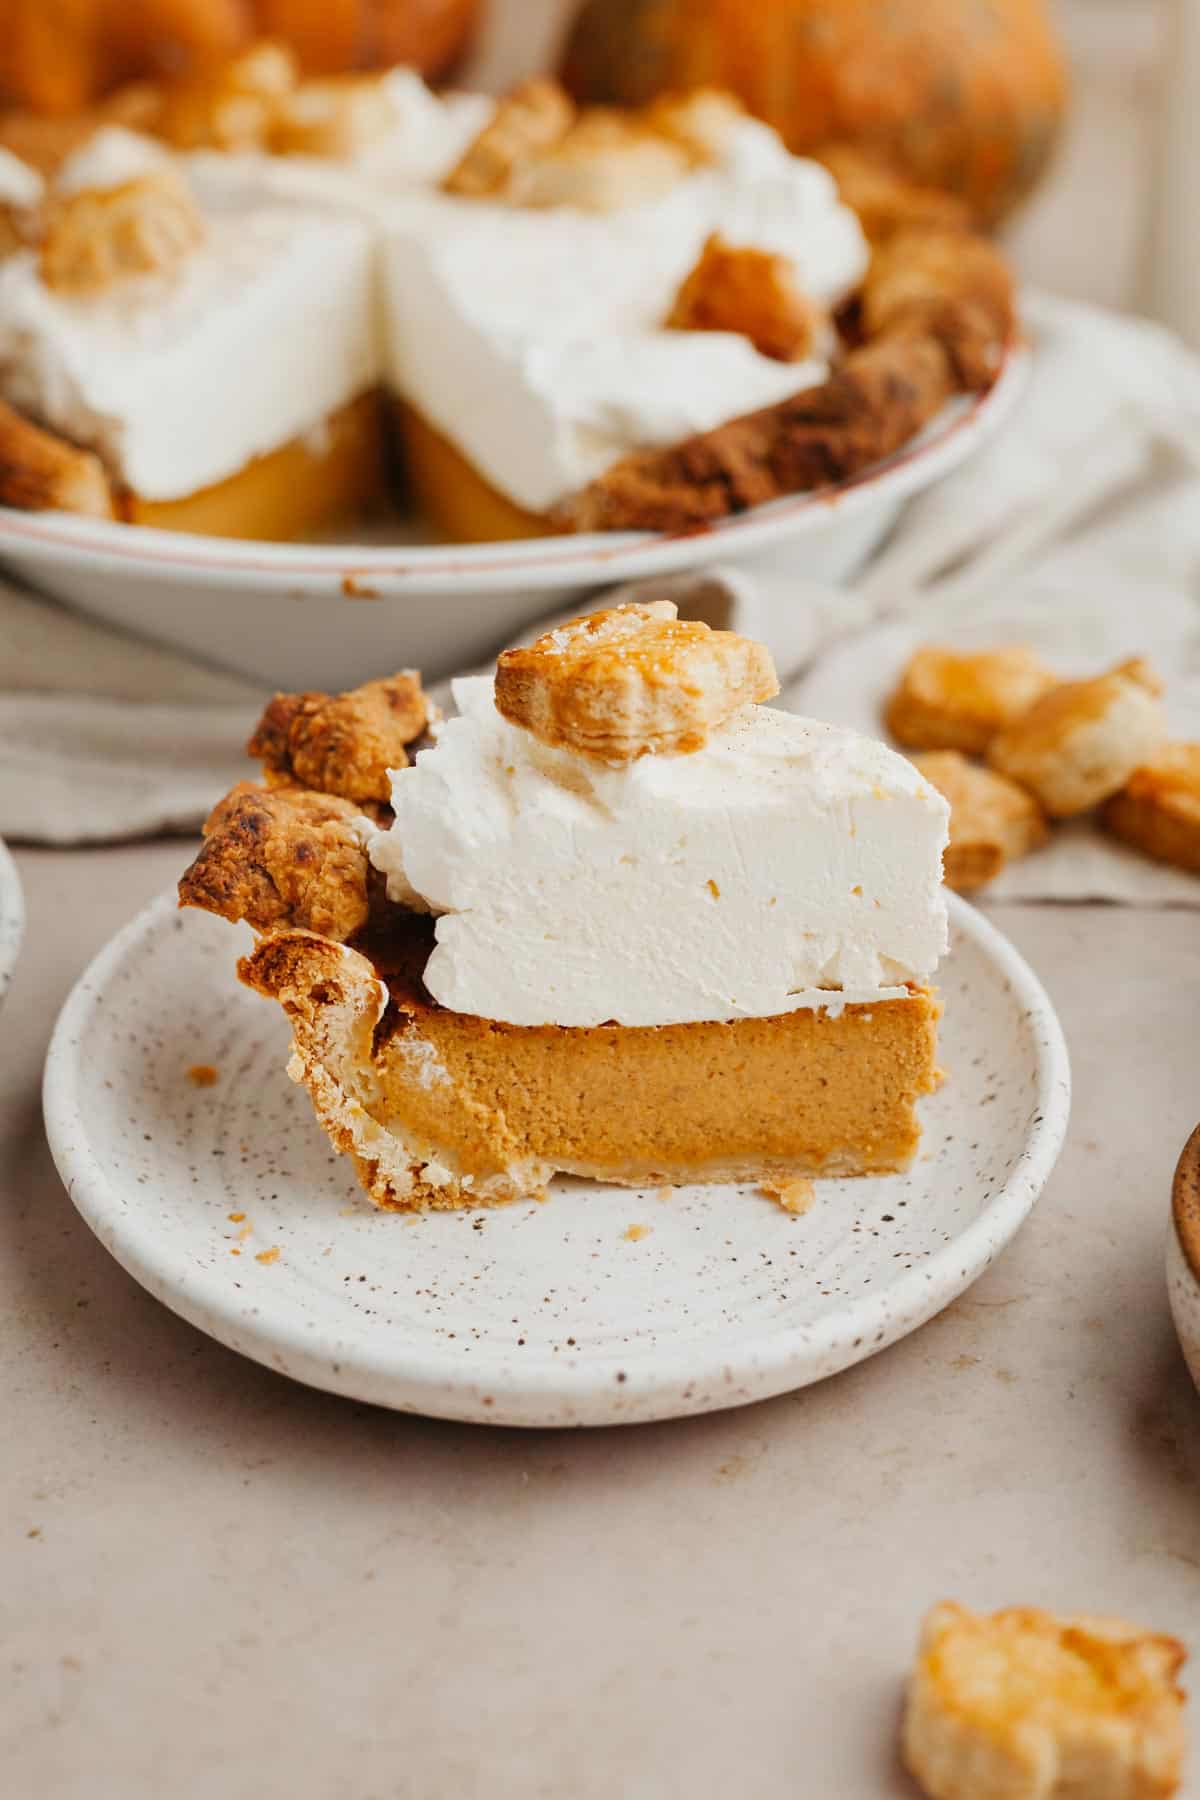 a slice of pumpkin pie on a small plate, the pie is covered in whipped cream.